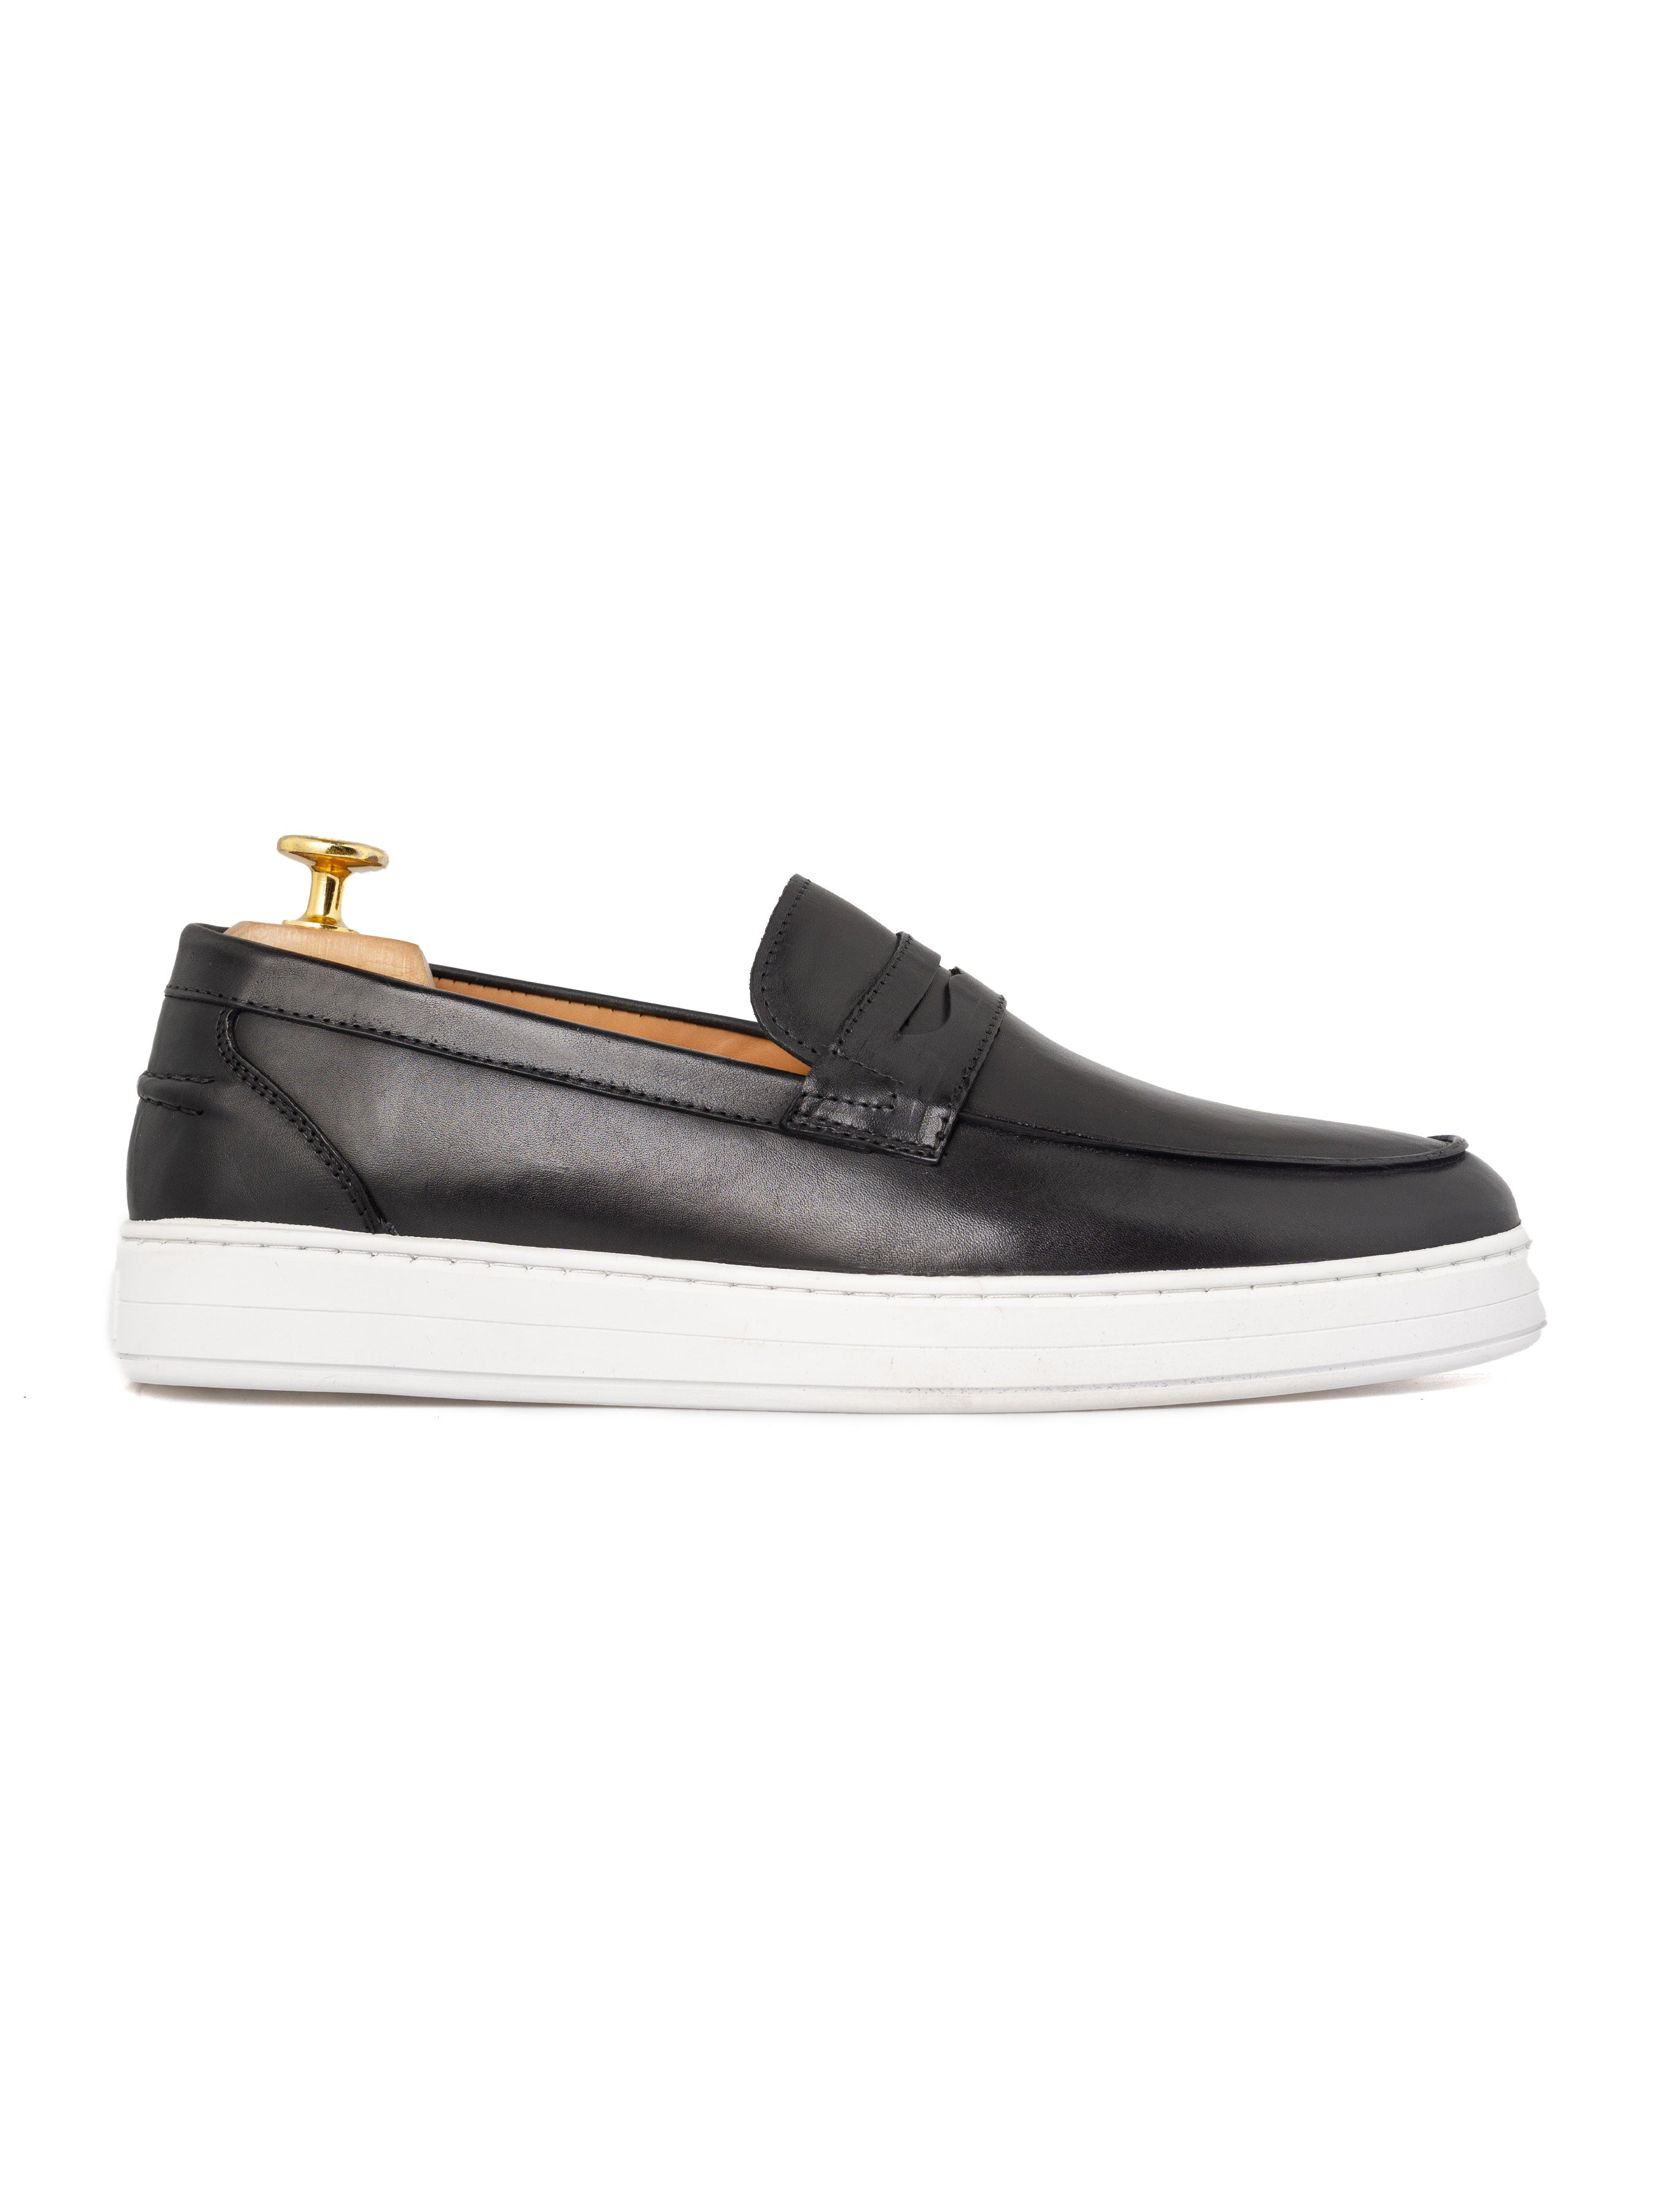 Penny Sneakers - Black Leather - Zeve Shoes